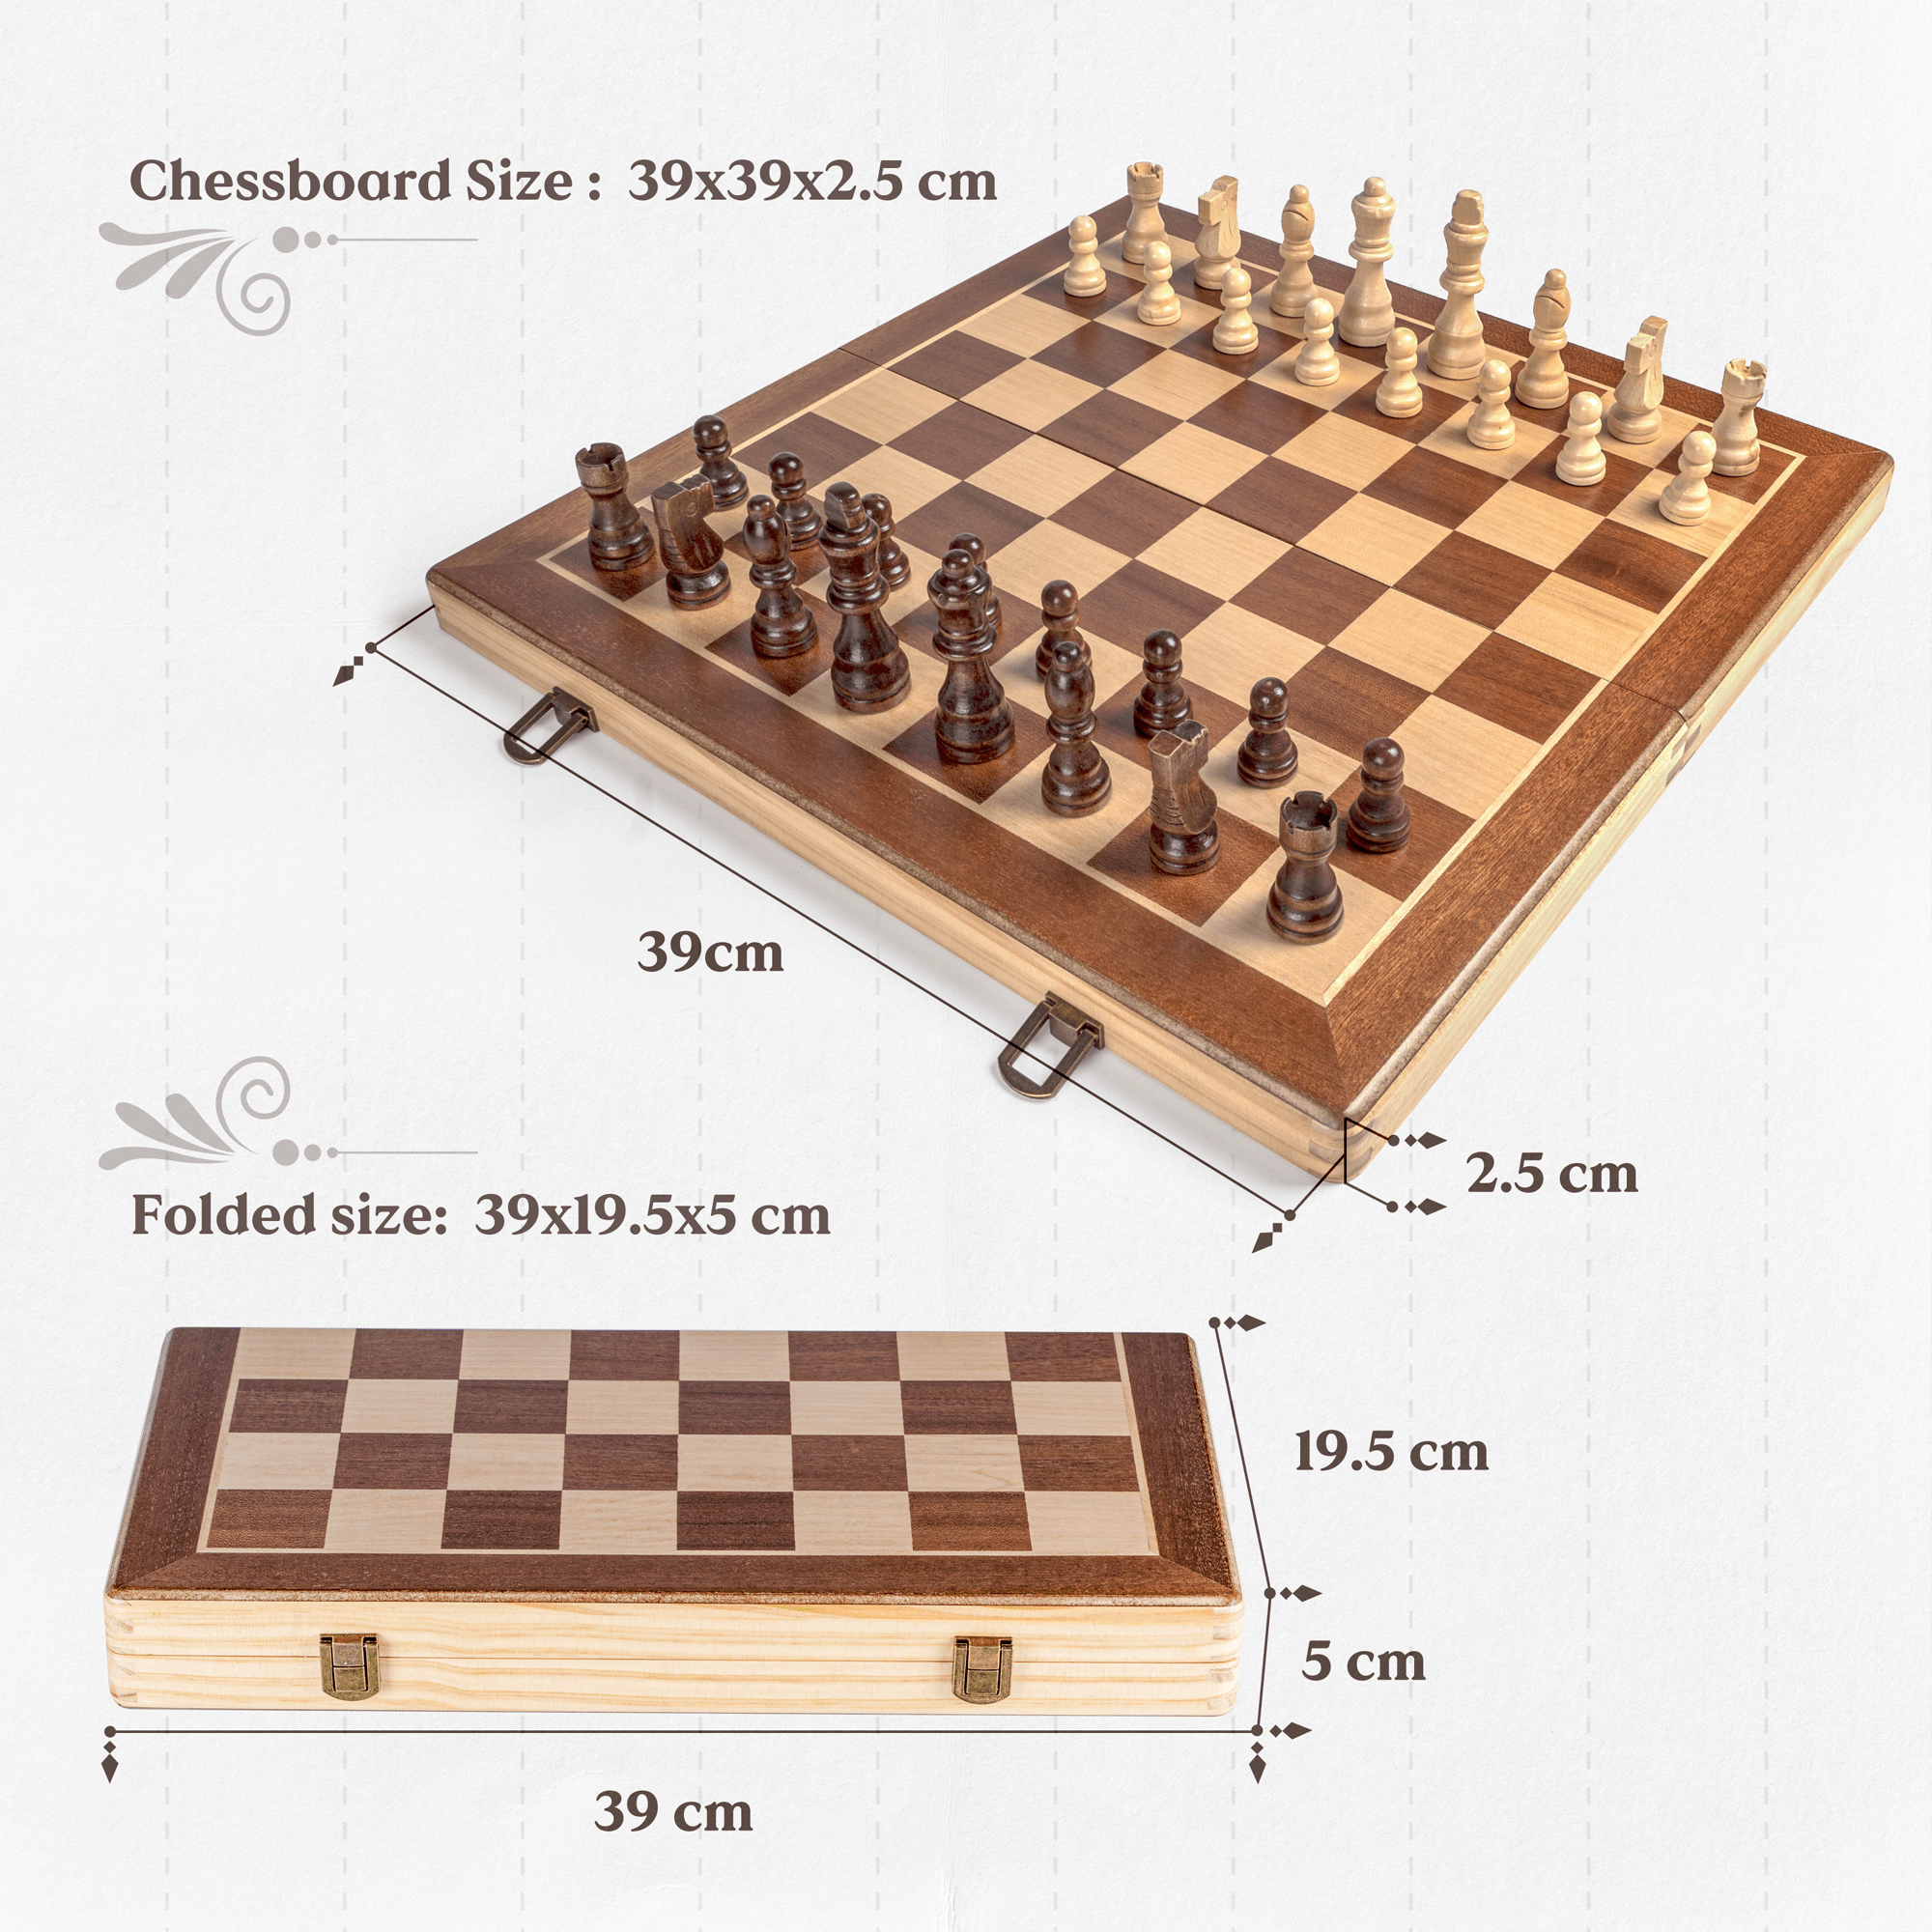 Portable Chess Board Foldable Magnetic Chess Game Board Game Foldable Chess Board Magnetic 2 in 1 Handmade Chess Toy and Gift for Children 39 x 39 cm